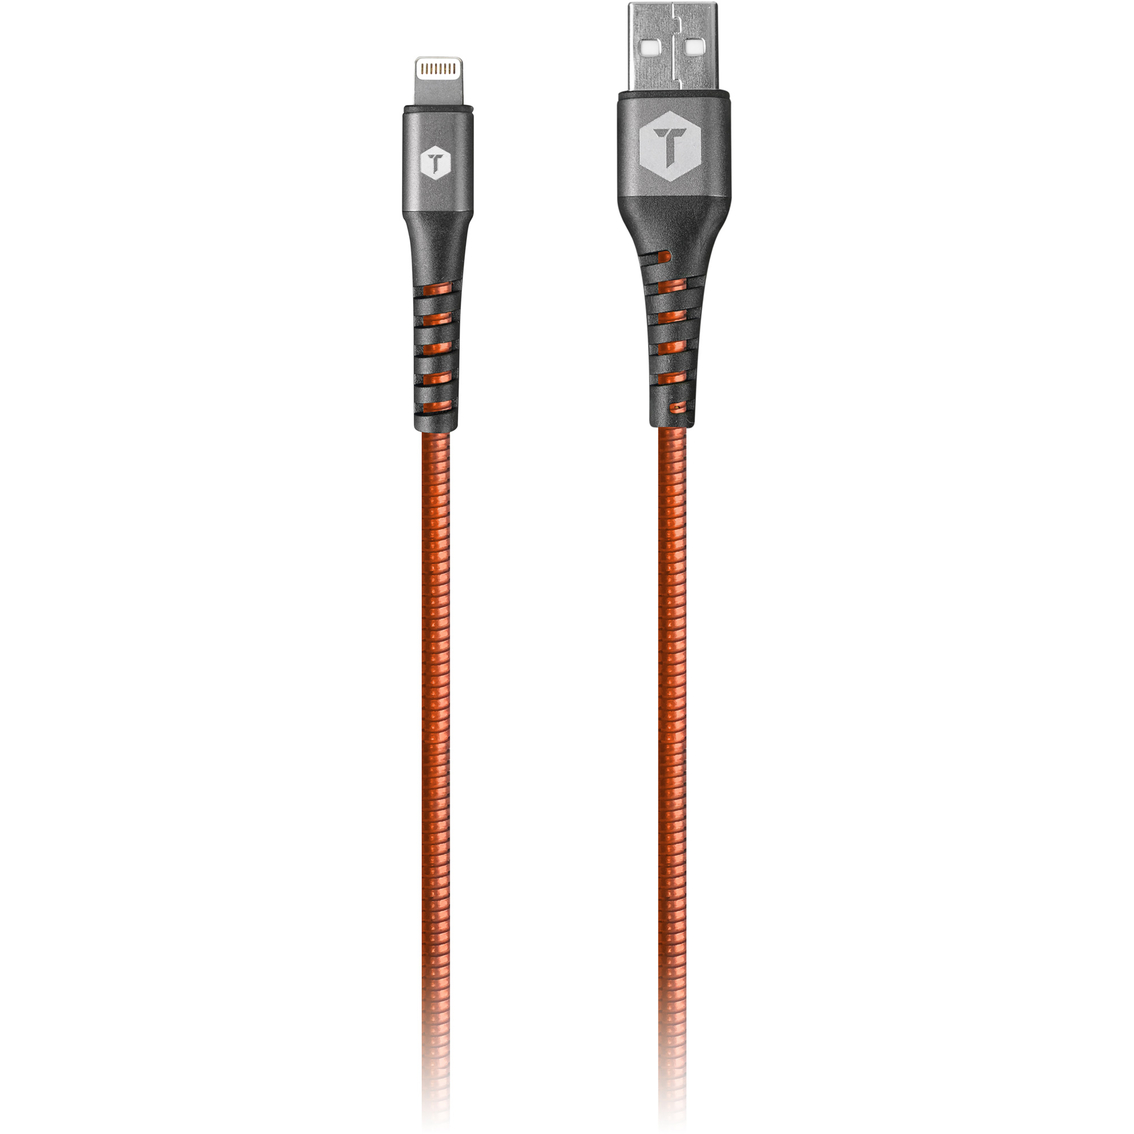 ToughTested 2 ft. Armor Lightning Cable - Image 2 of 3